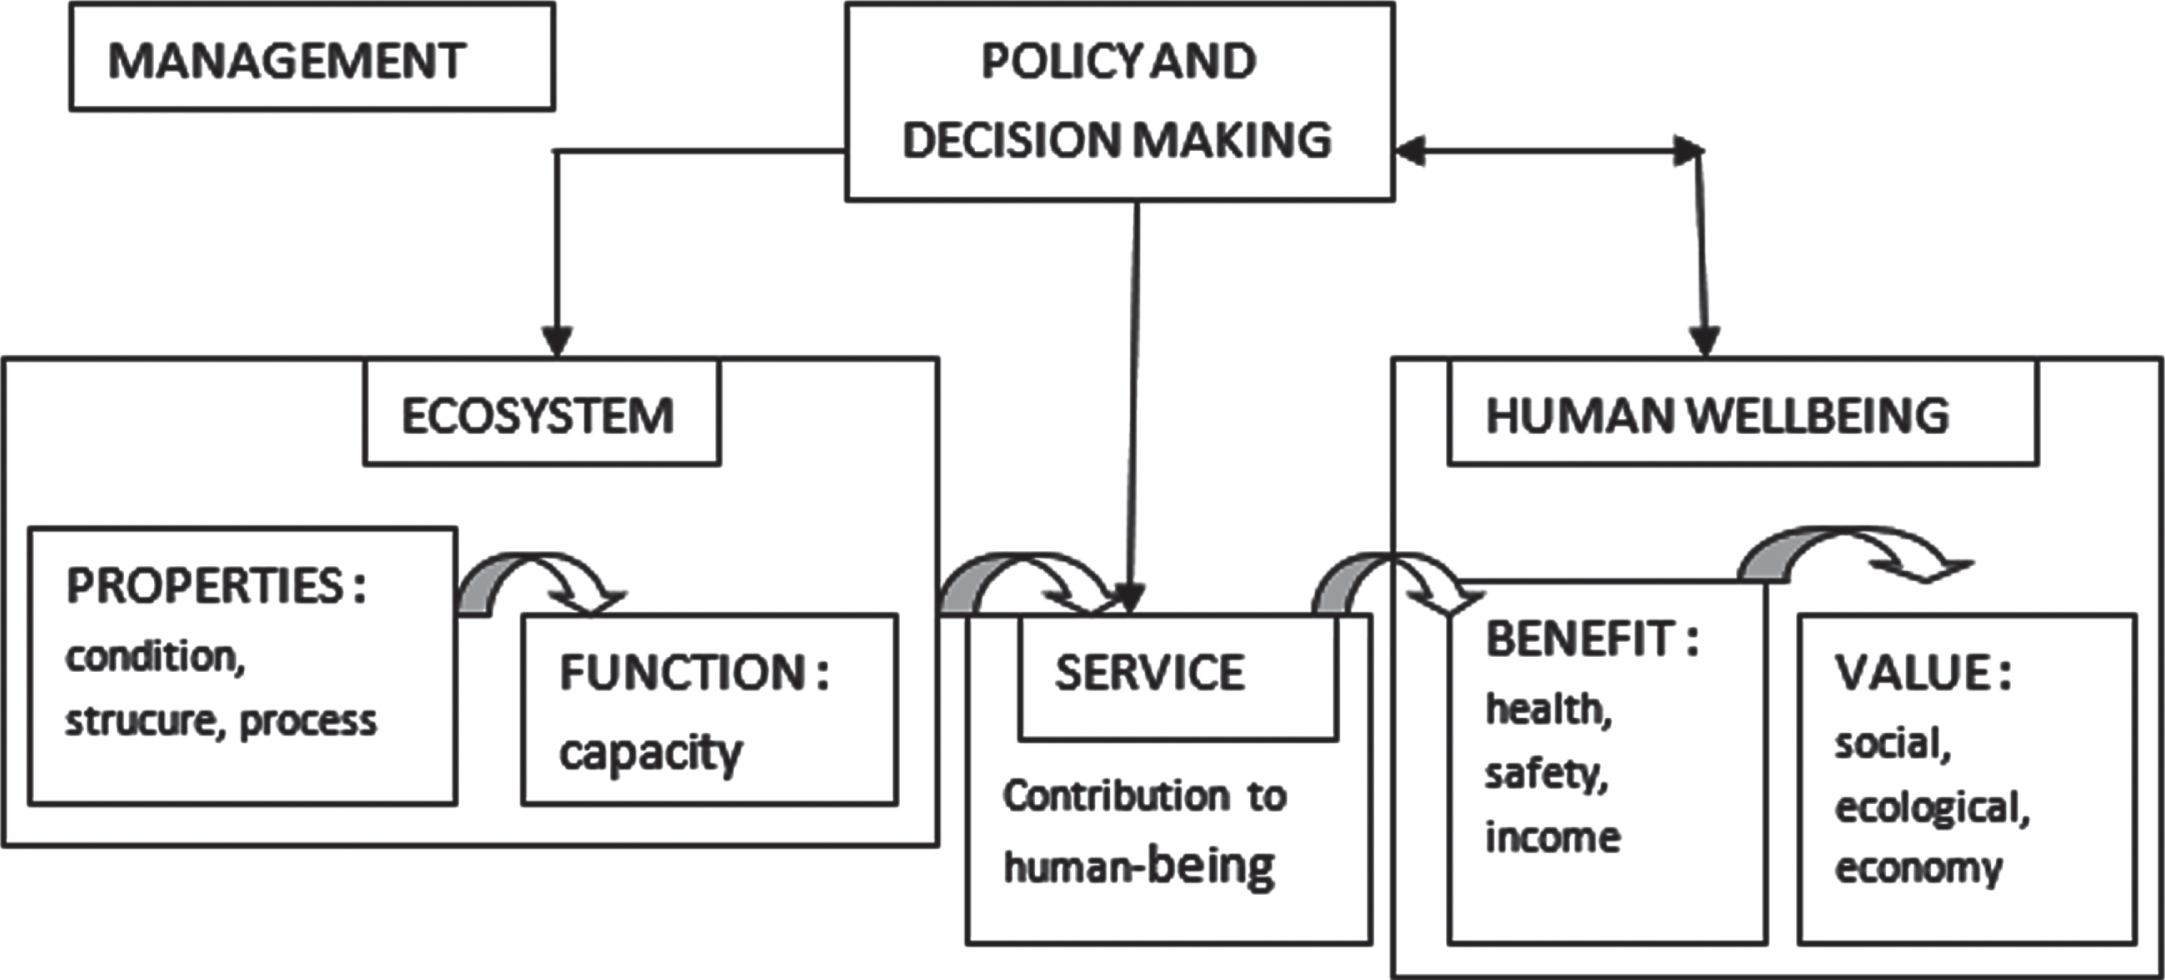 Ecosystem Services Model Approach (Source: Alexander PE van Oudenhoven (2015), inspired by De Groot et al (2010a) and Haines Young and Protchin (2010)).